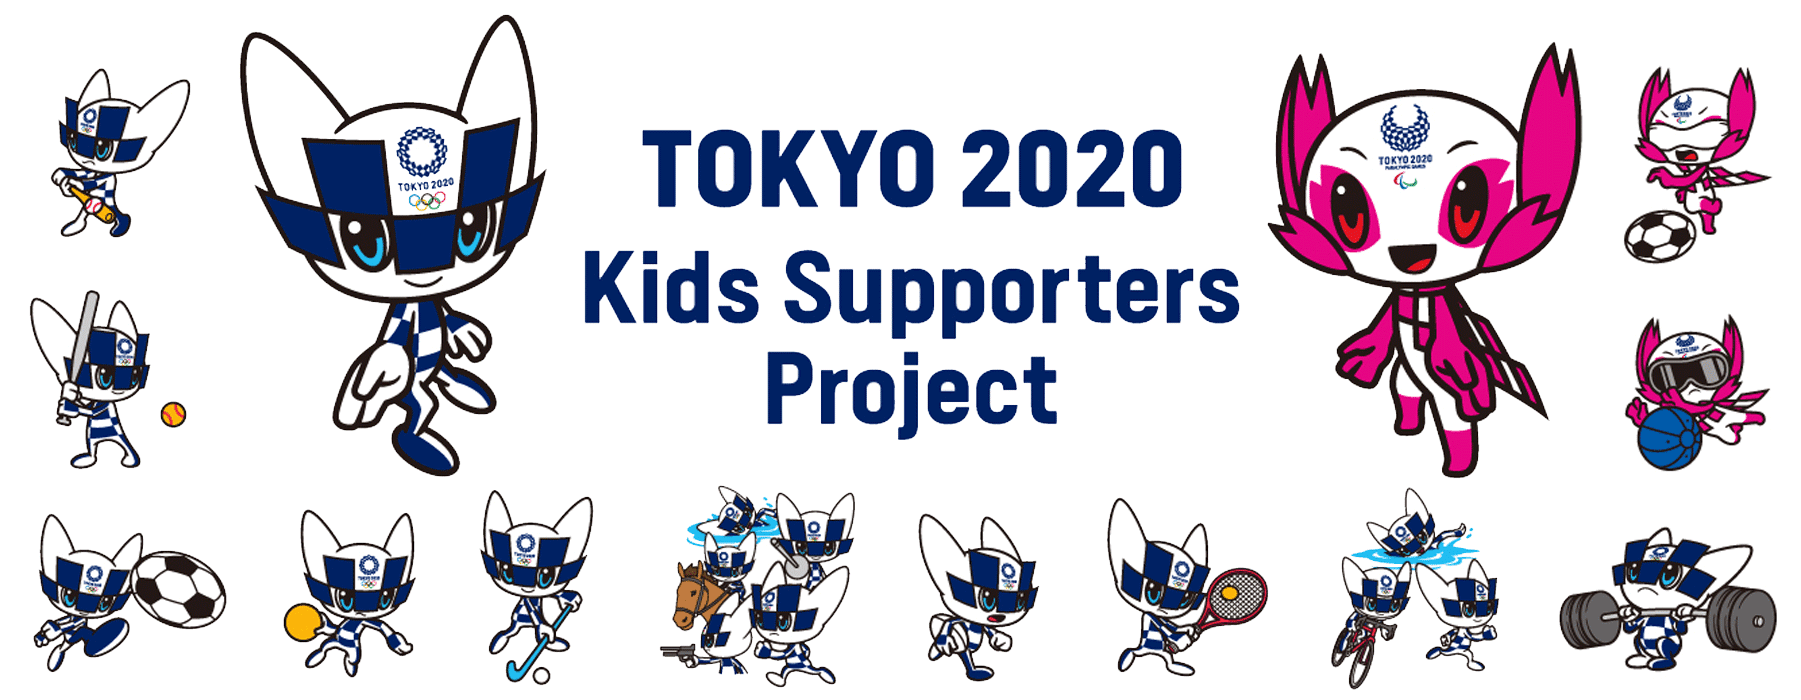 Tokyo 2020 Kids Supporters Project